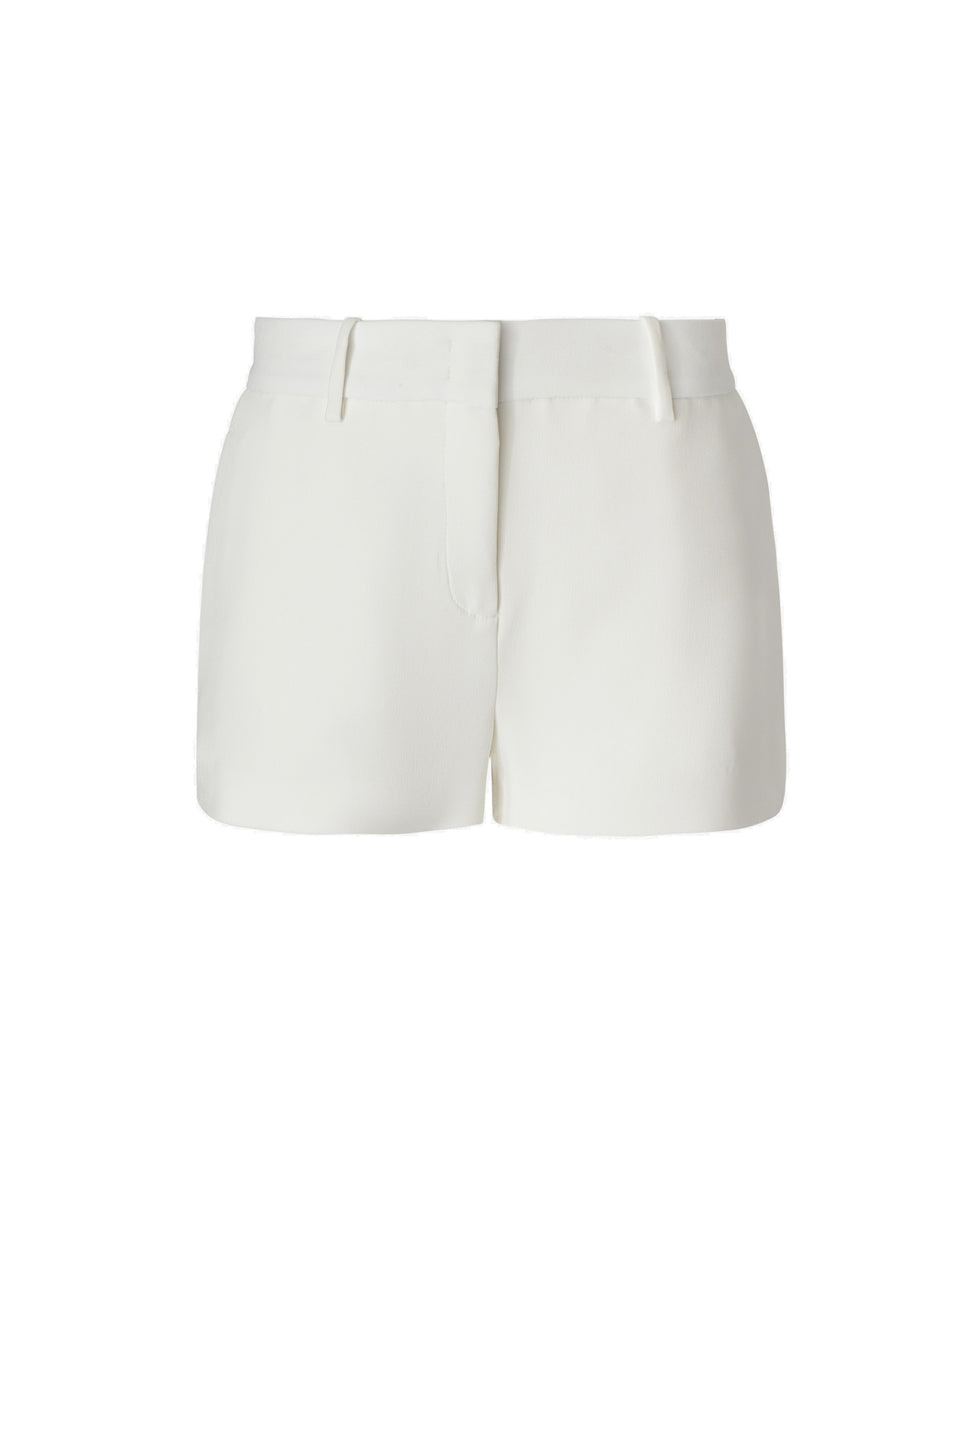 Tailored shorts in white fabric